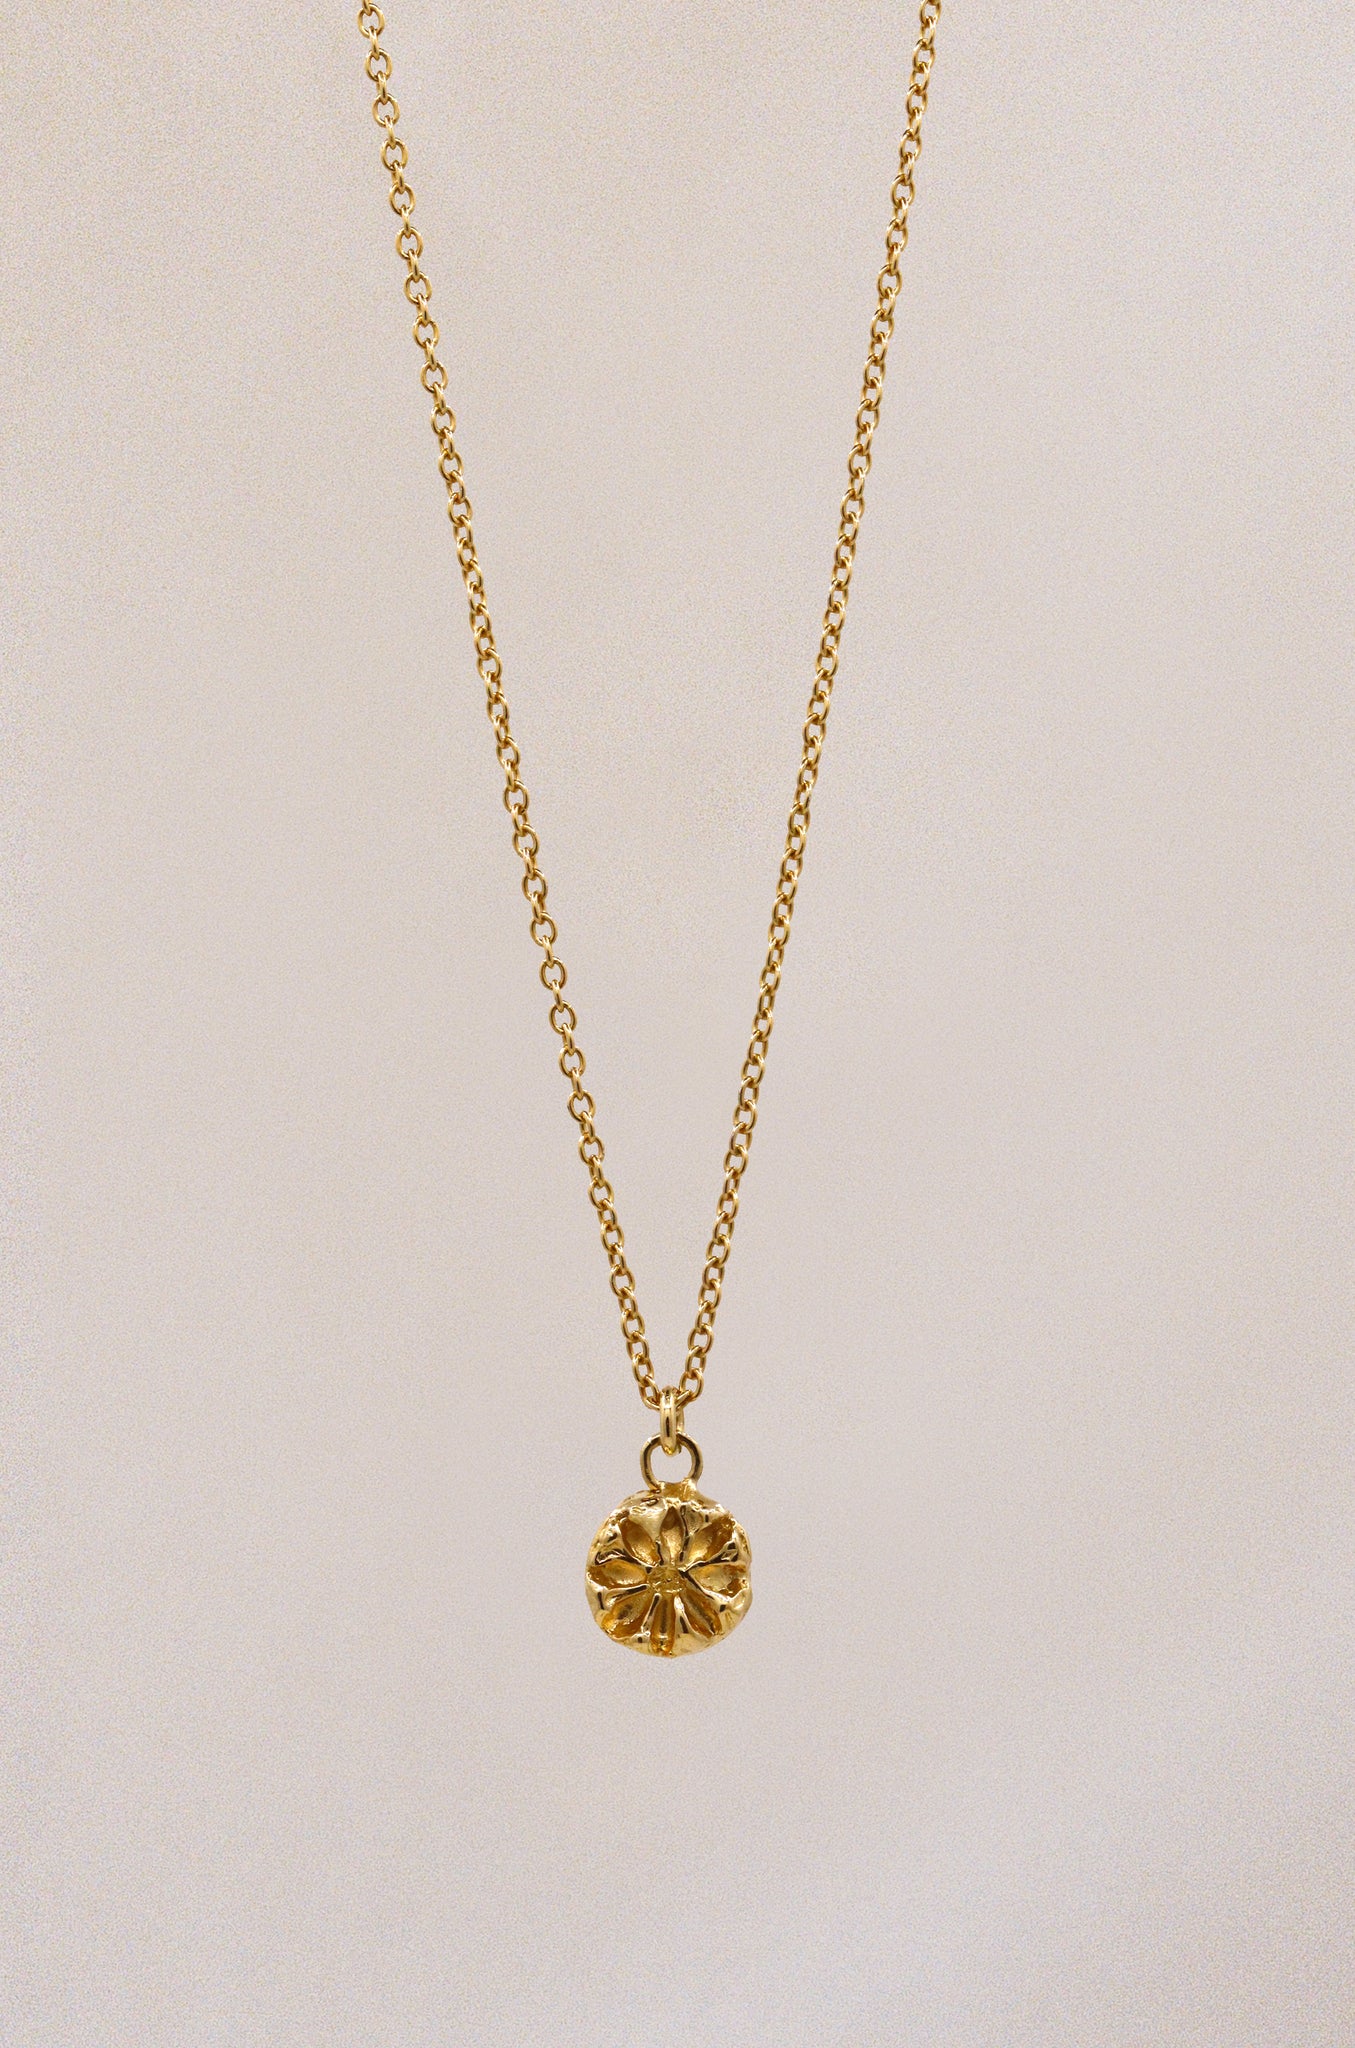 Quarry Necklace - 9ct Yellow Gold